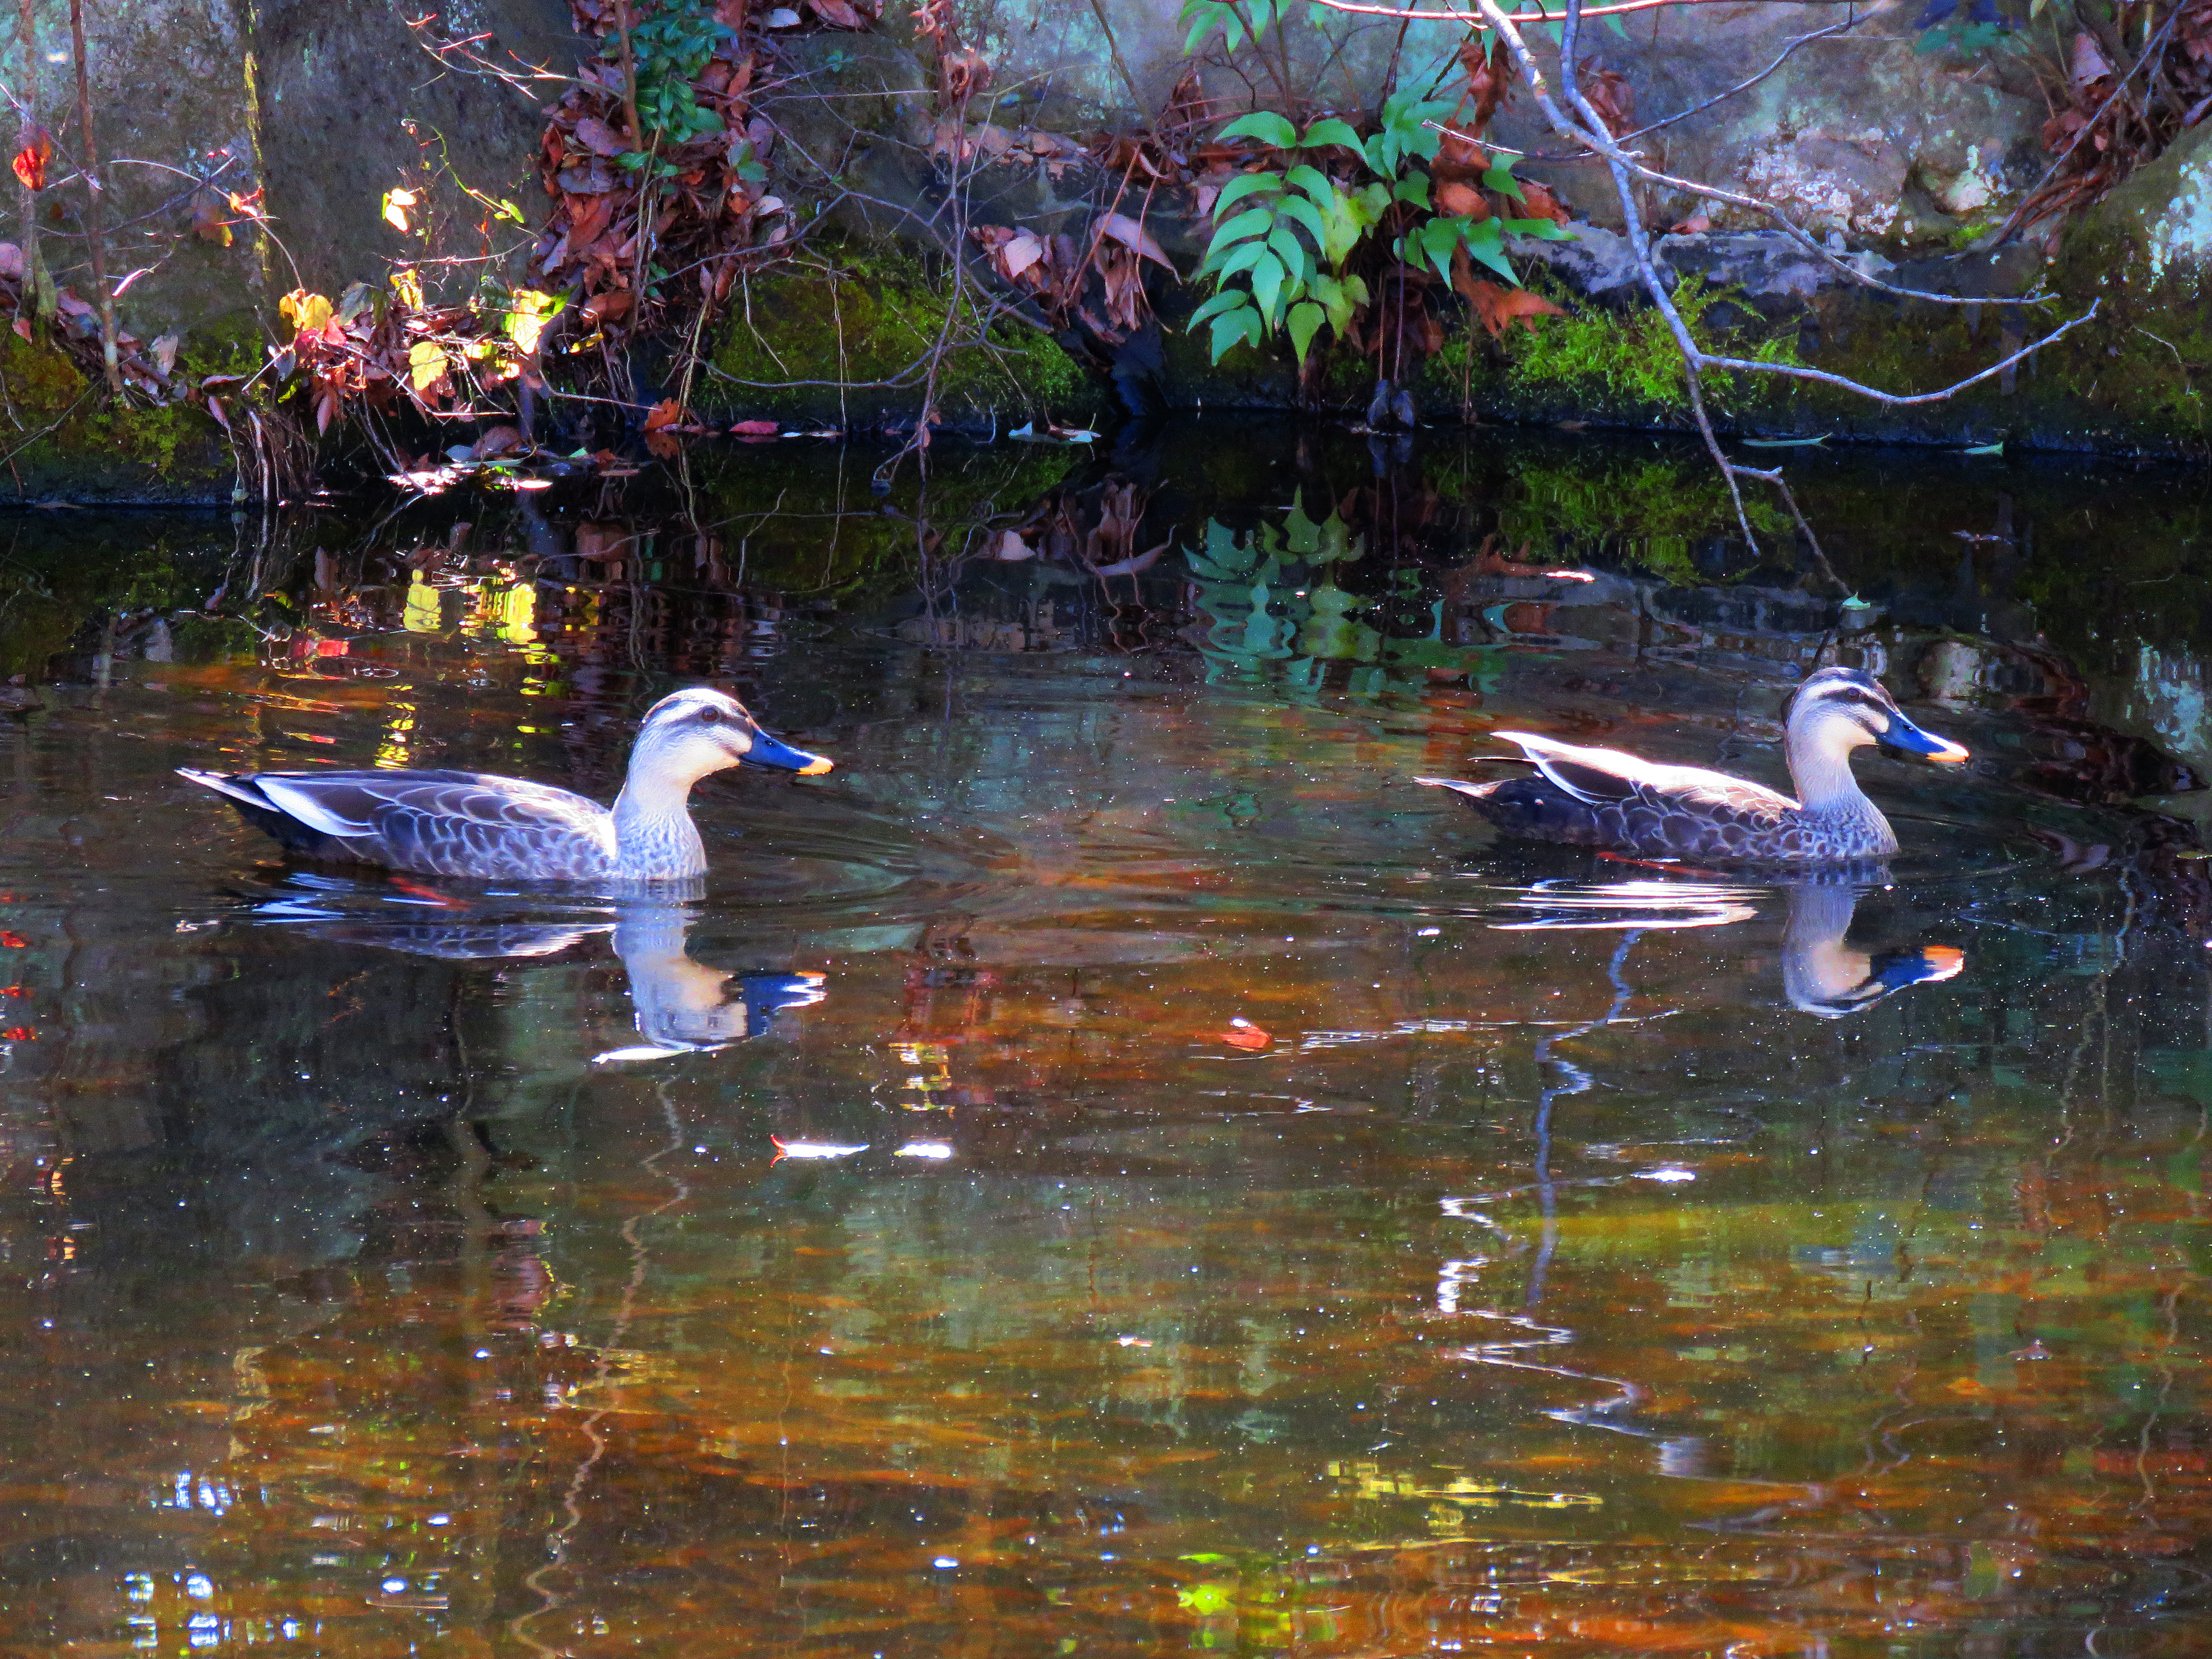 The presence of spot-billed ducks has been confirmed for nine consecutive years